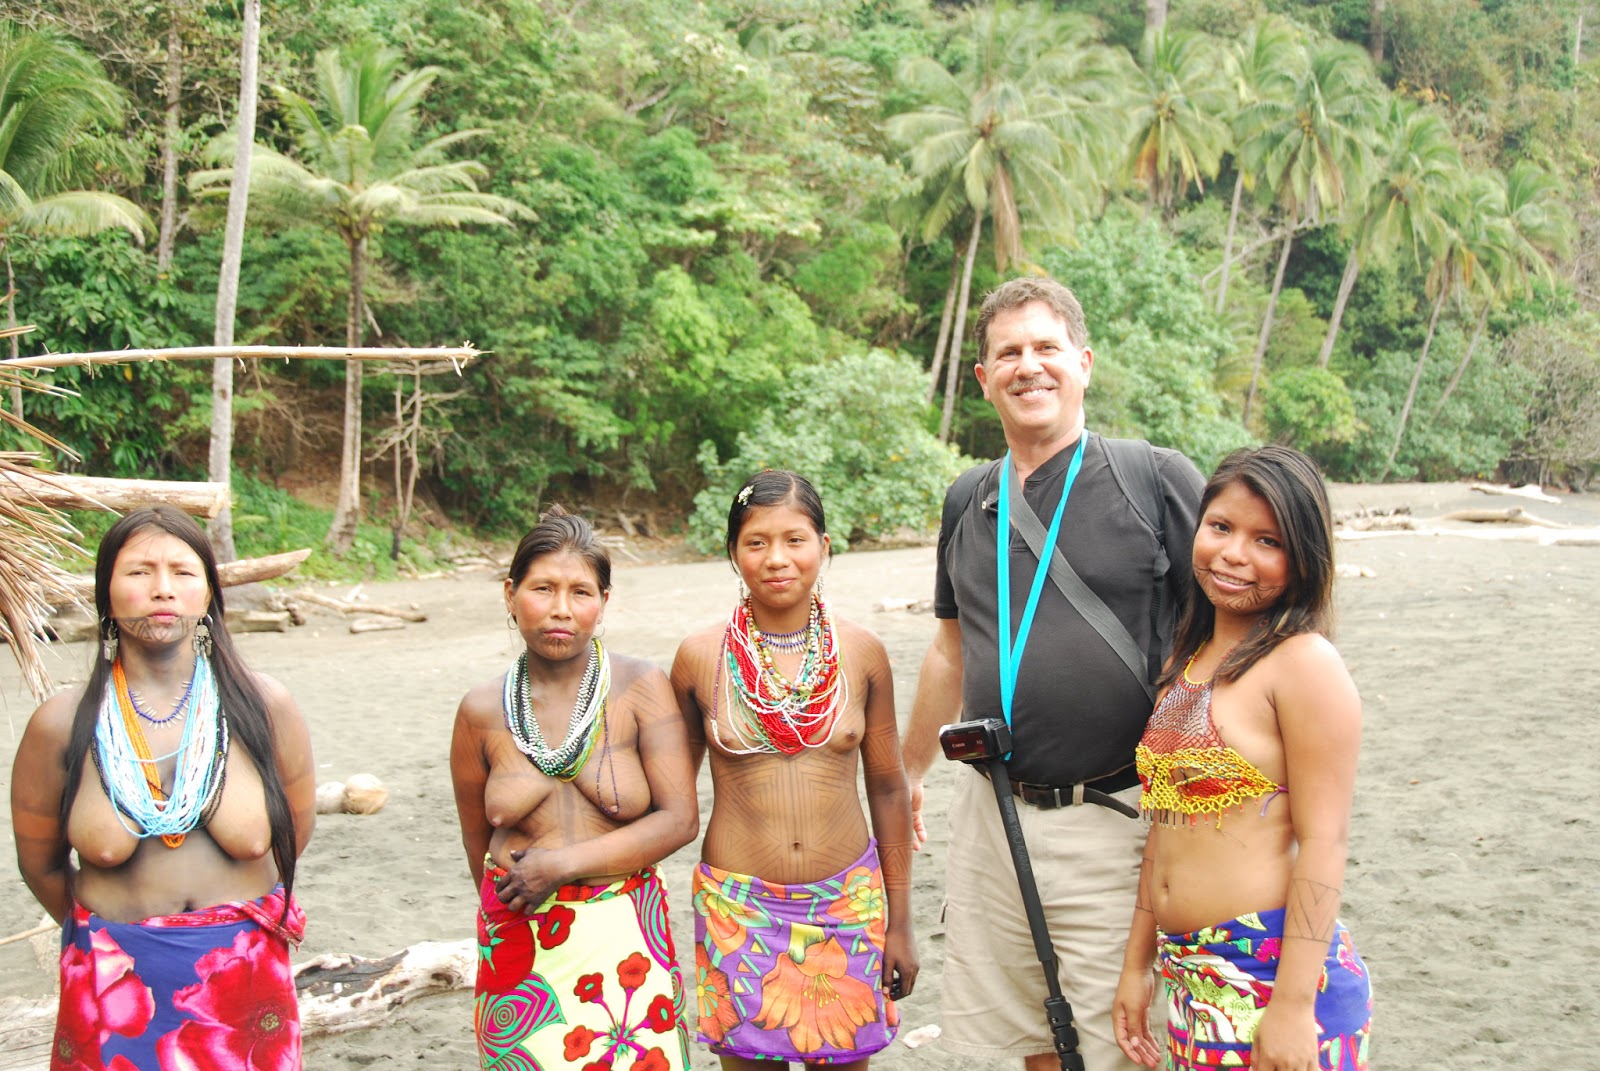 Today we visited the Embera, a tribe that lives as if frozen 2000 years ago...